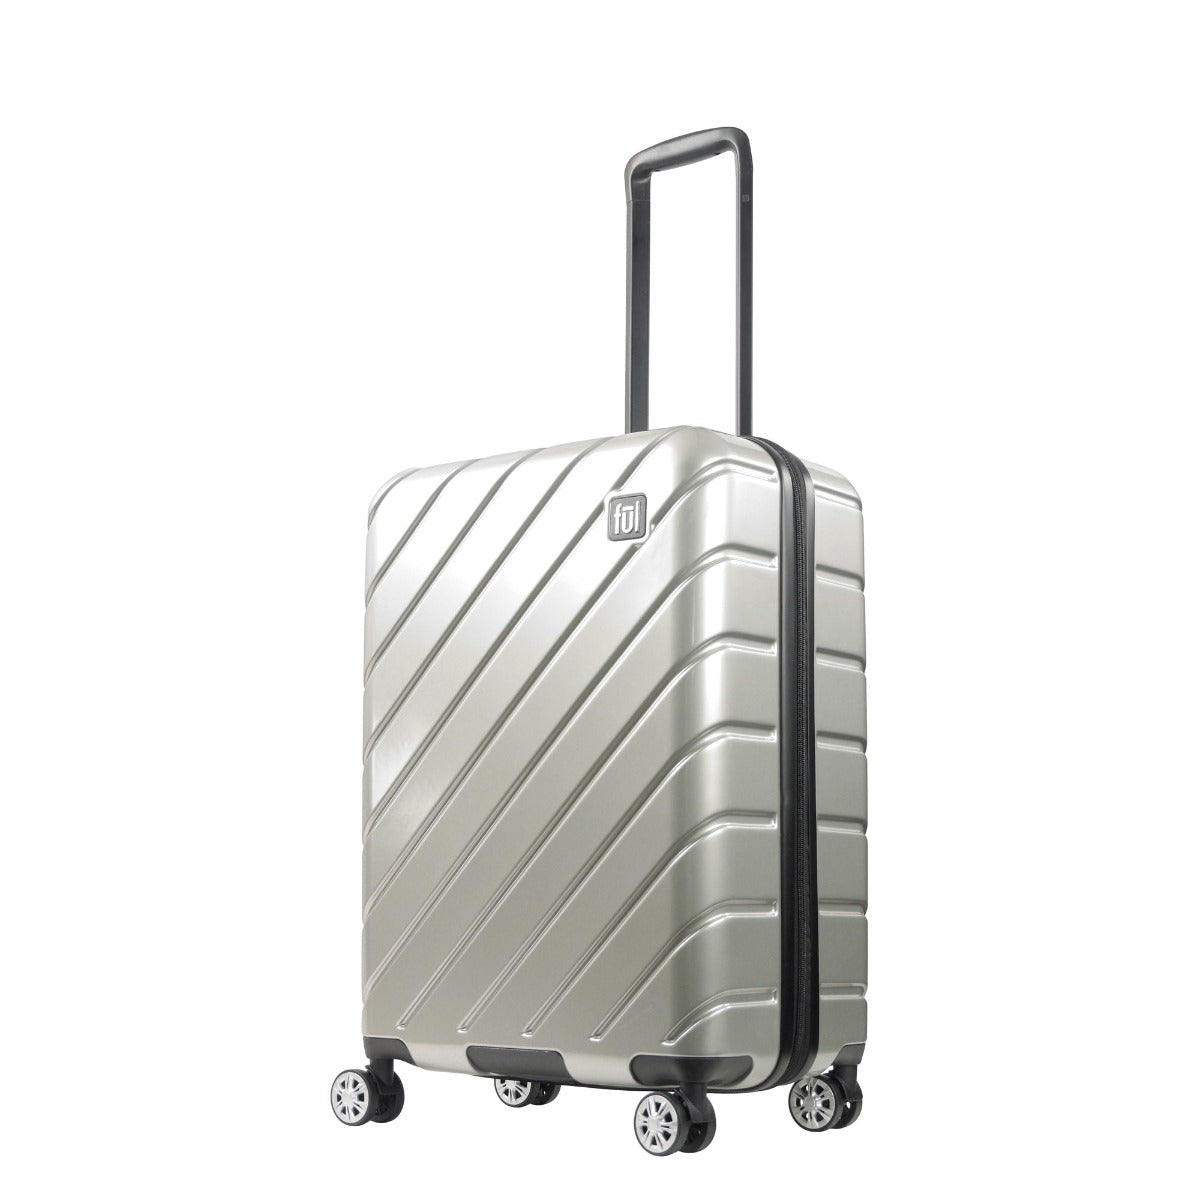 Ful Velocity 27" Expandable Hardside Spinner Luggage, Silver